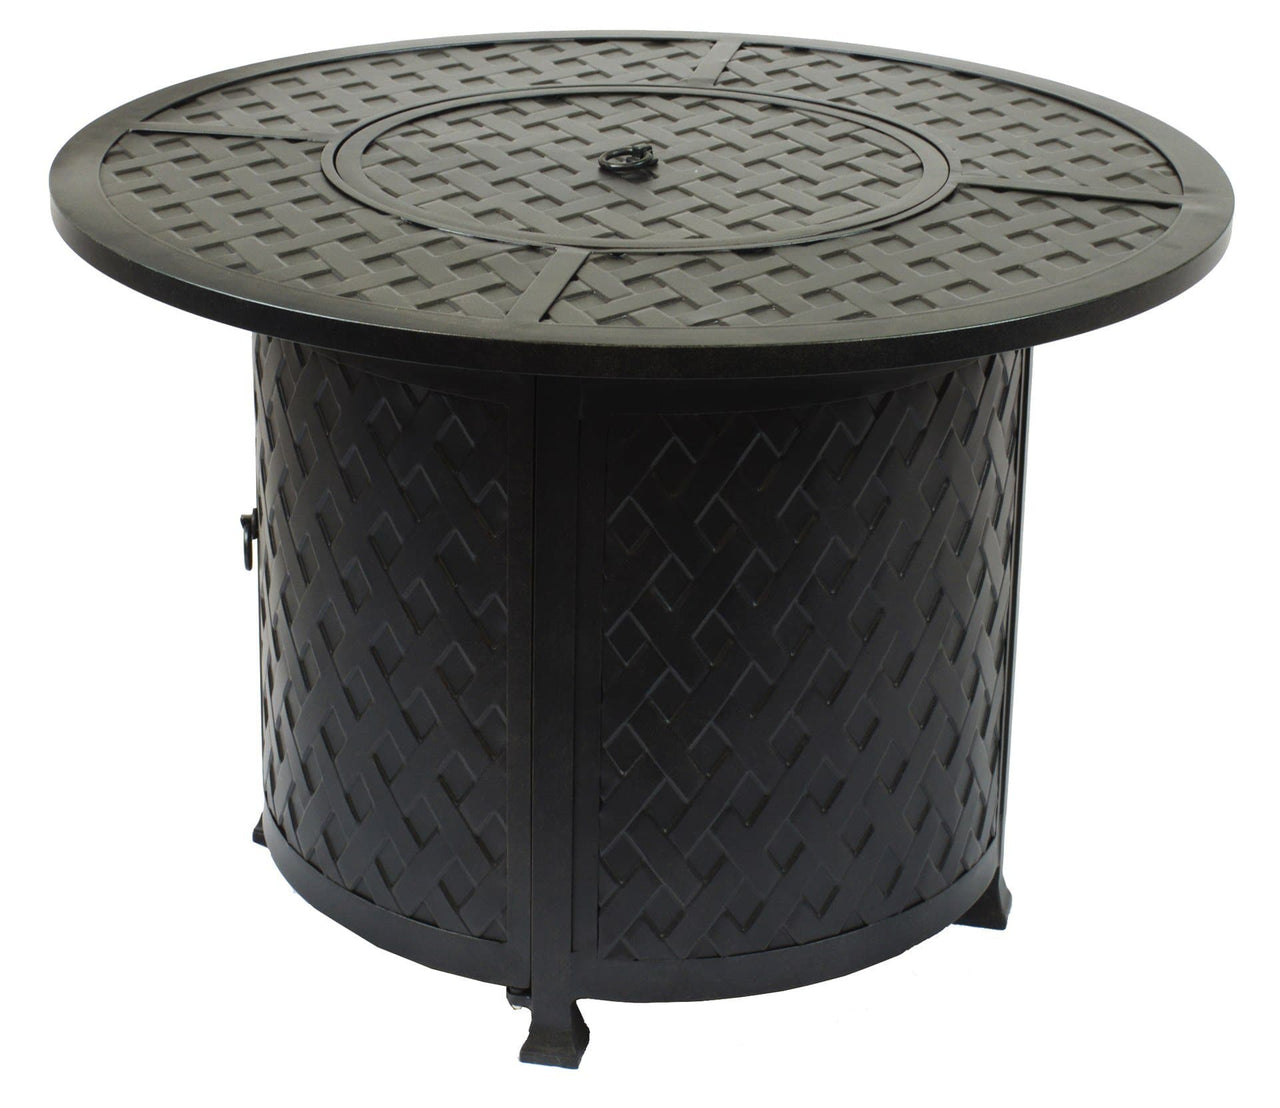 Comfort Care Firetable Bistro Top & Base - 36 Inch Round - Senior.com Fire Tables